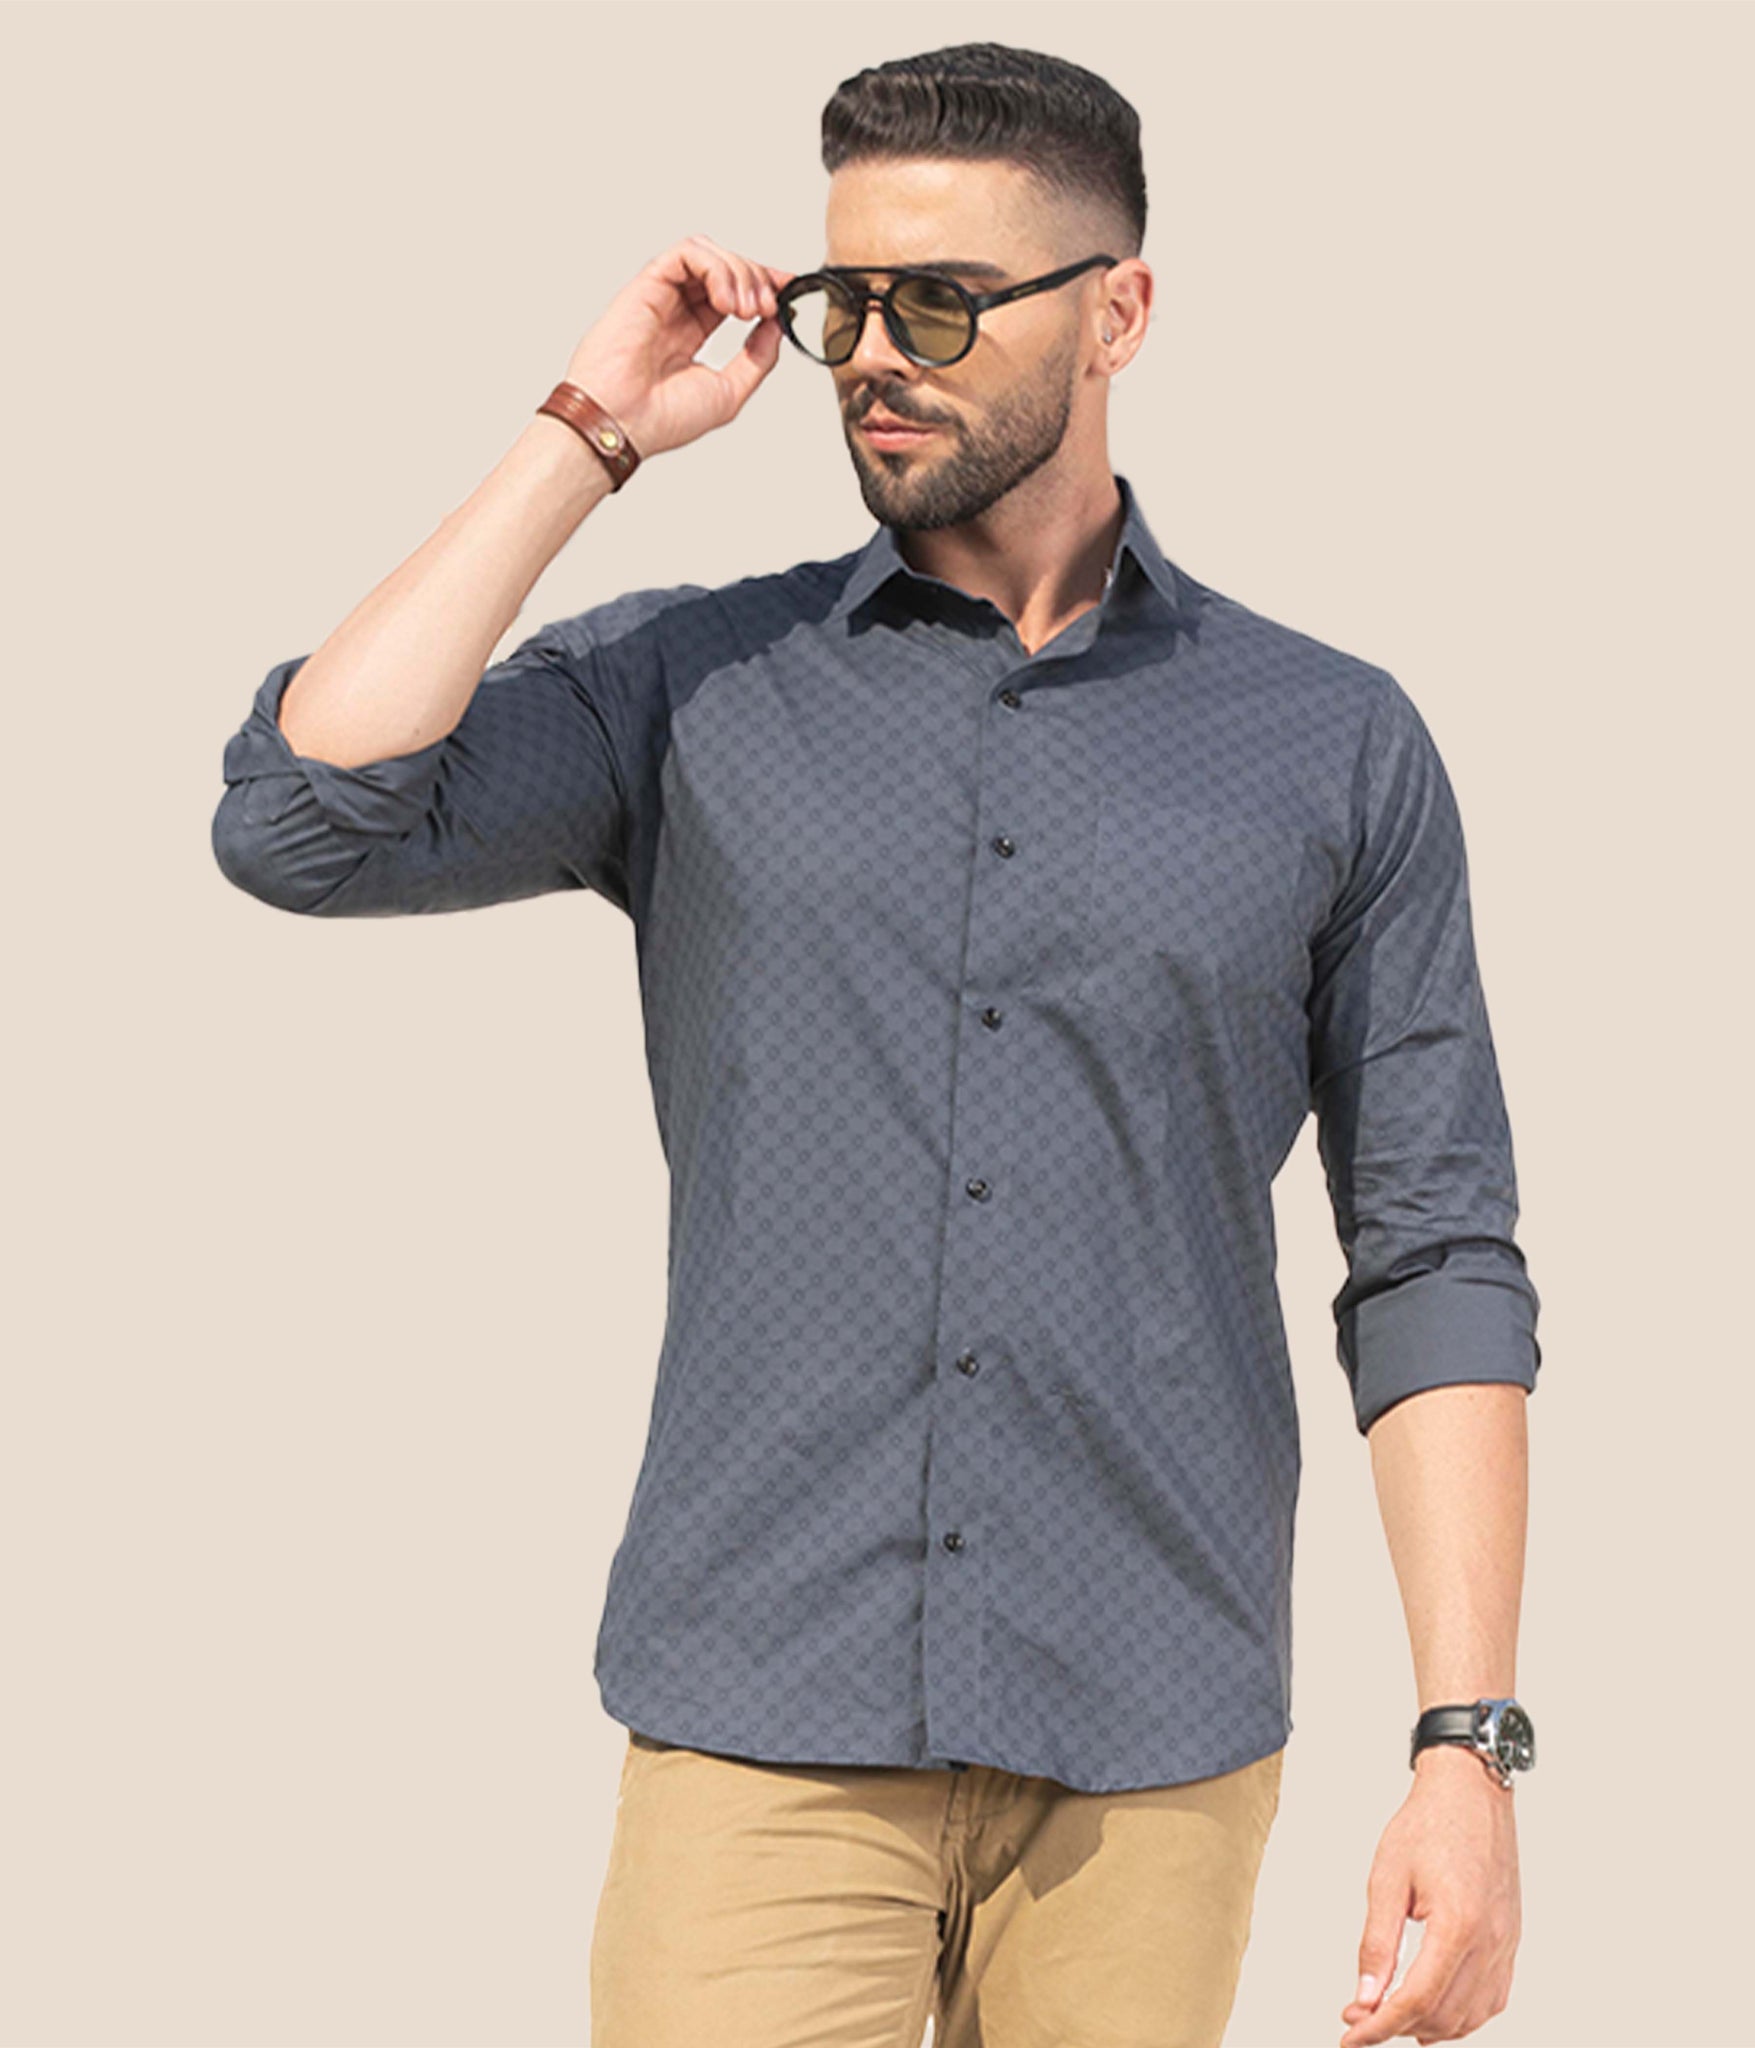 Printed shirt in dusty grey Color